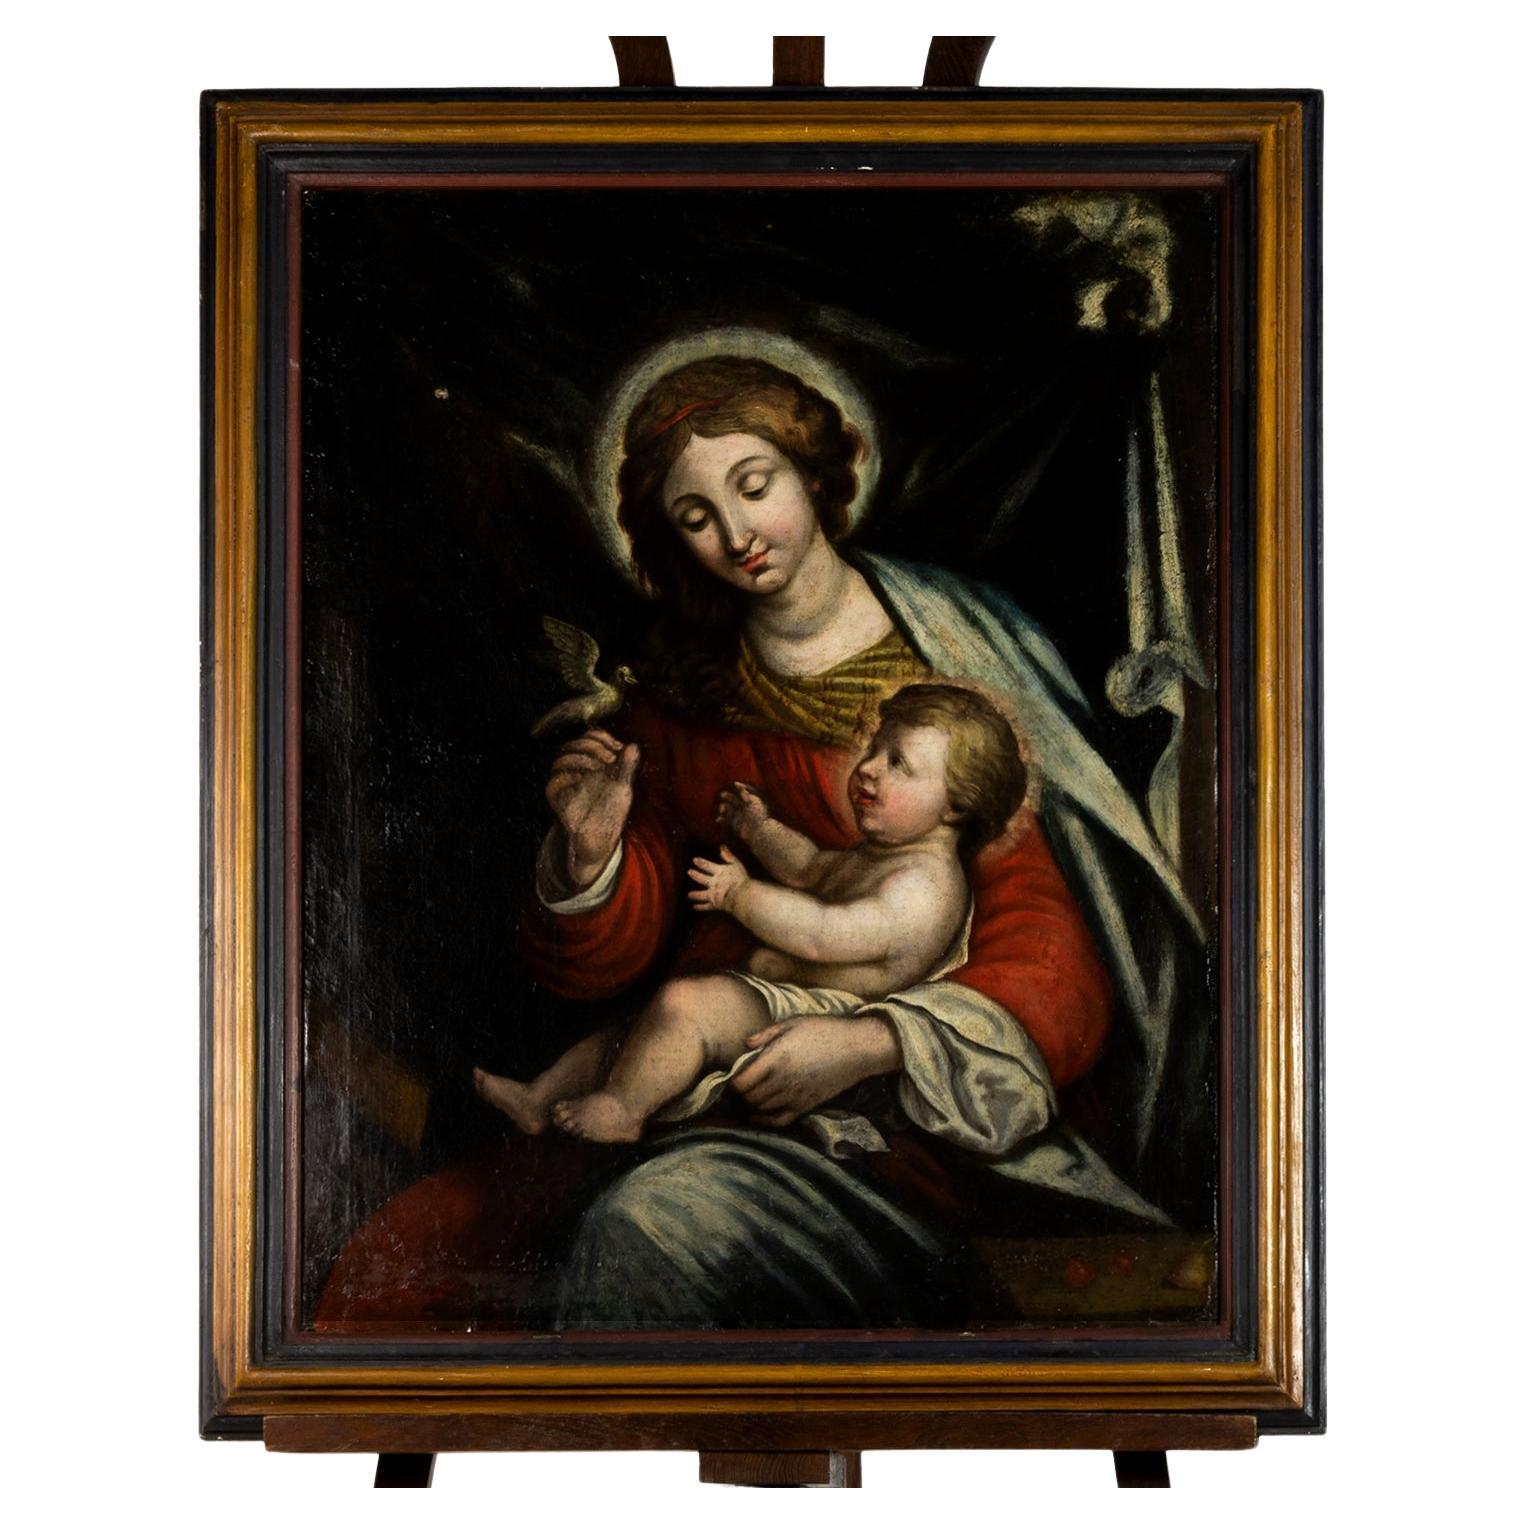 A Renaissance oil painting of Our Lady of Peace, Mary with Jesus Christ, Prince of Peace on her arm in a dark background, red and green robes, the Mother is represented  holding a dove (a symbol of peace) with her left hand and the boy Savior in the